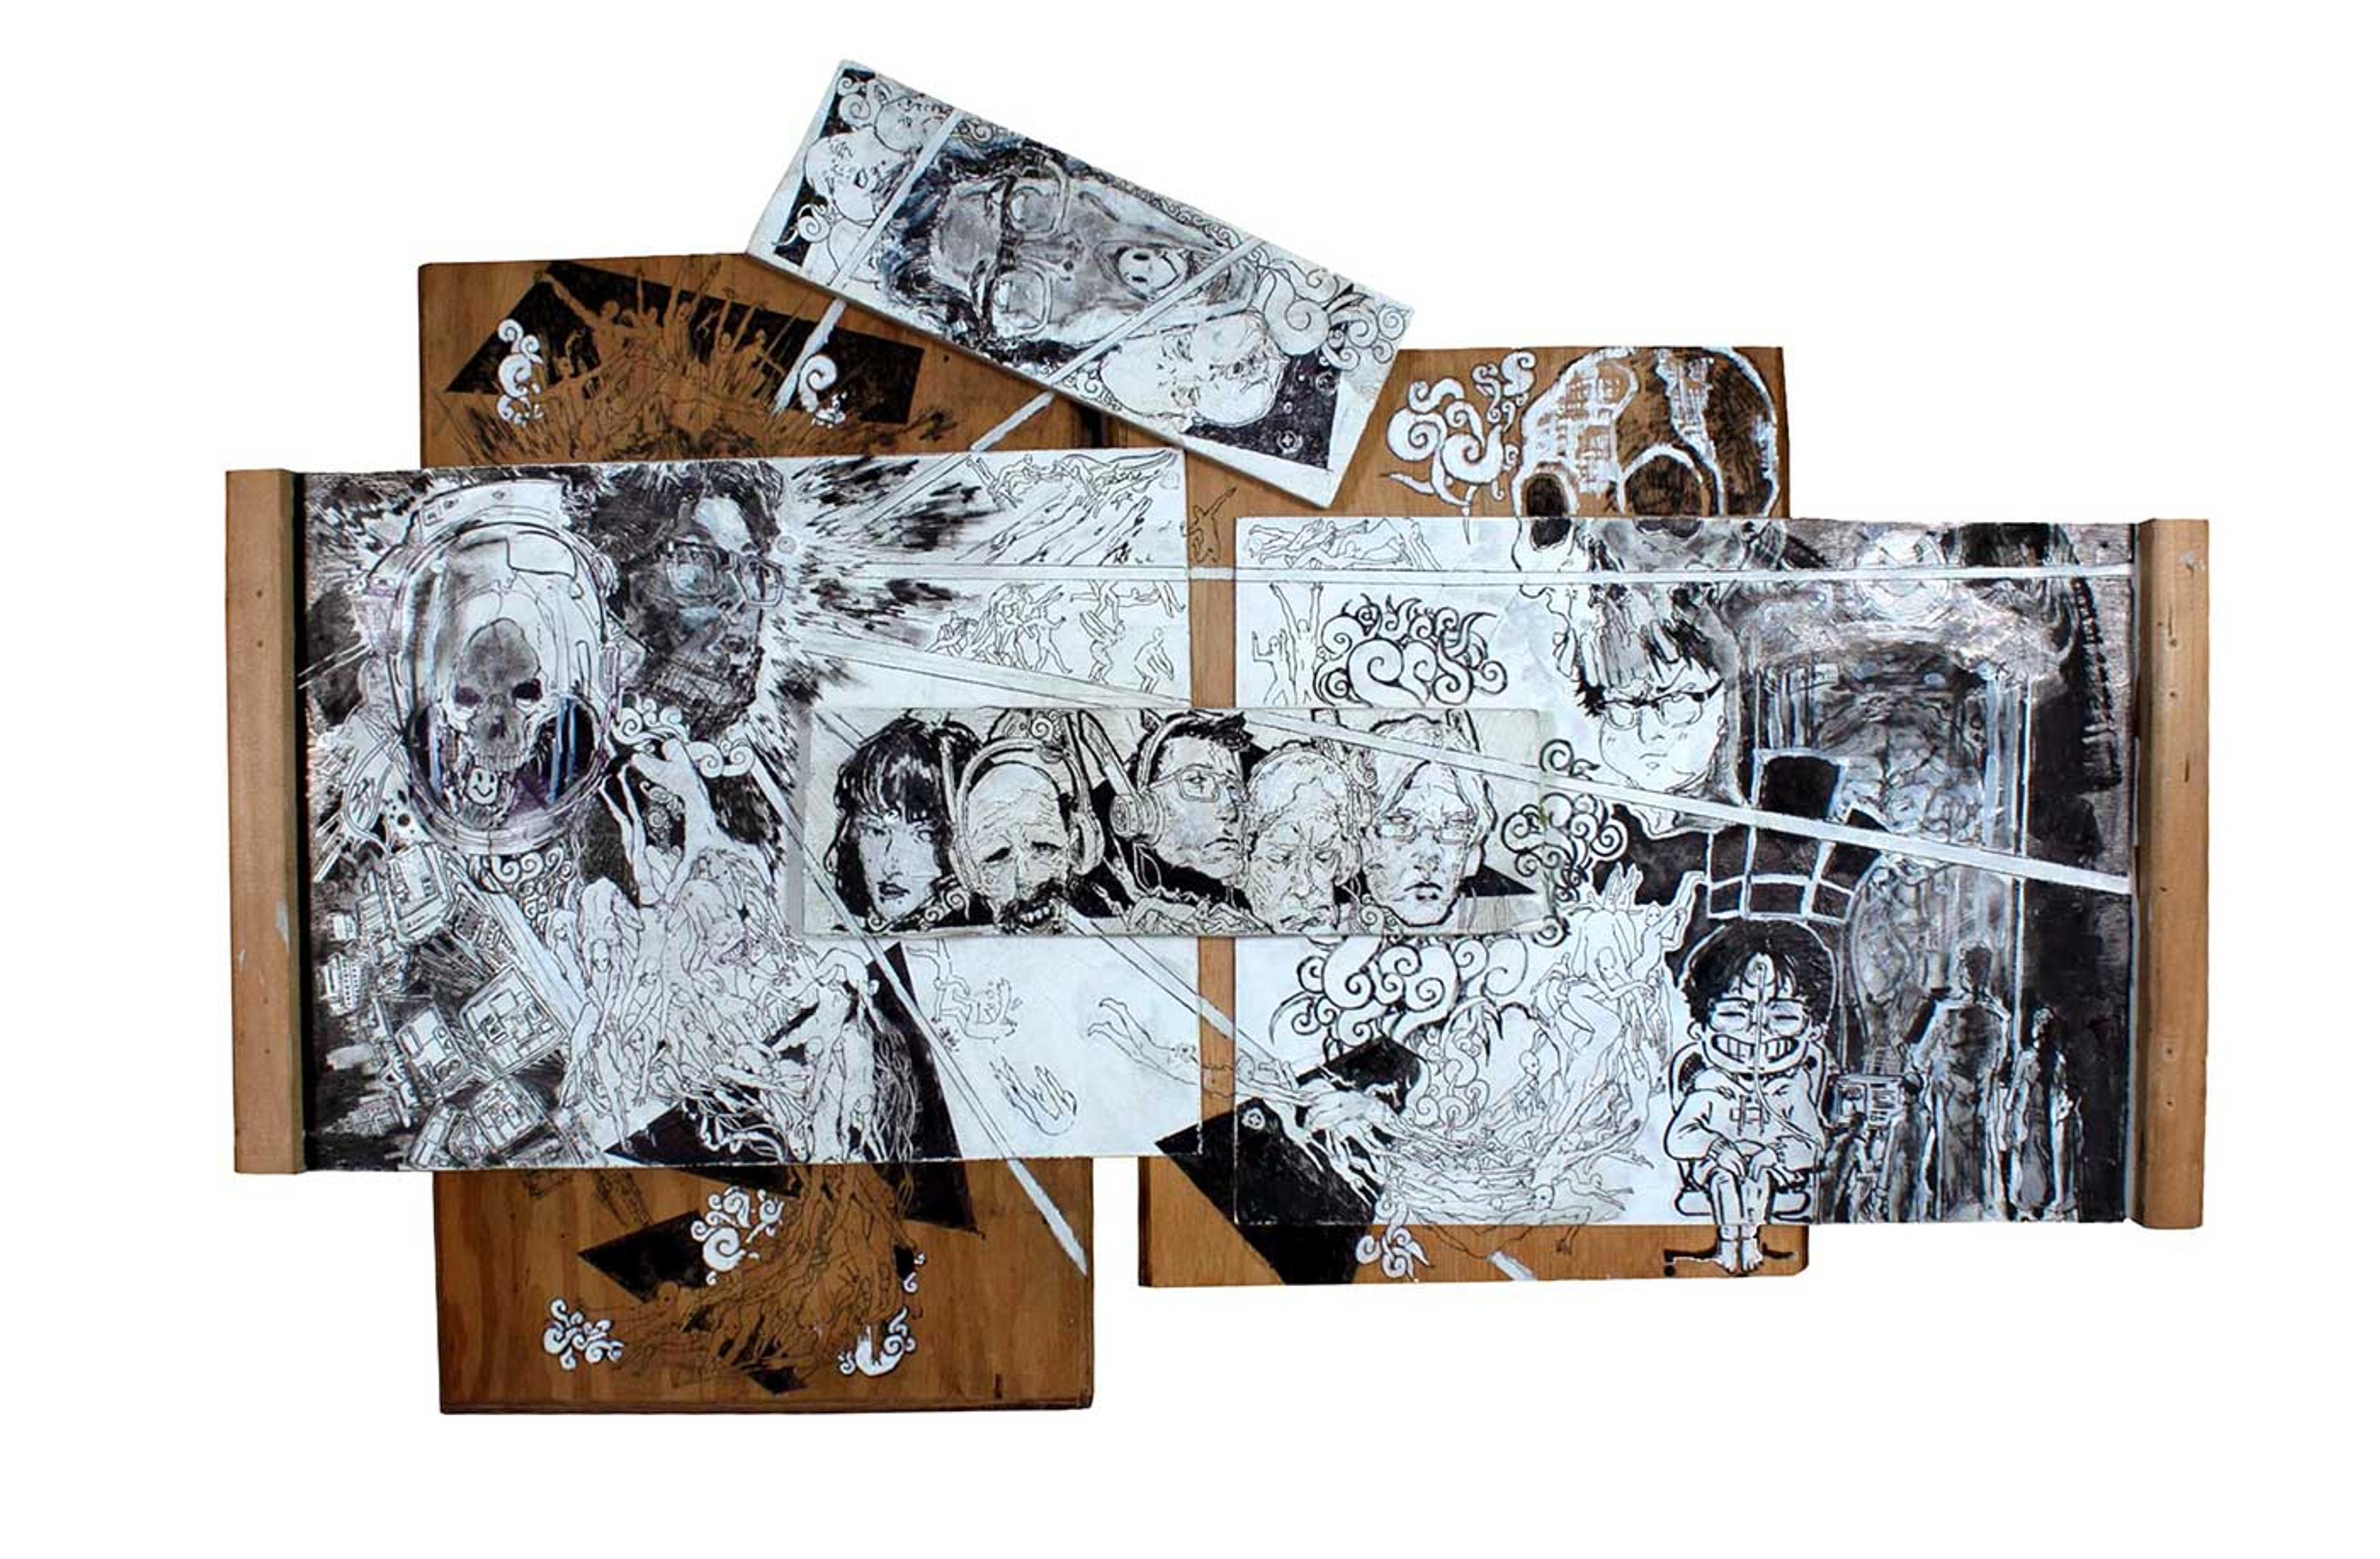 Drawing of several figures and structures in black and white on pieces of wood.